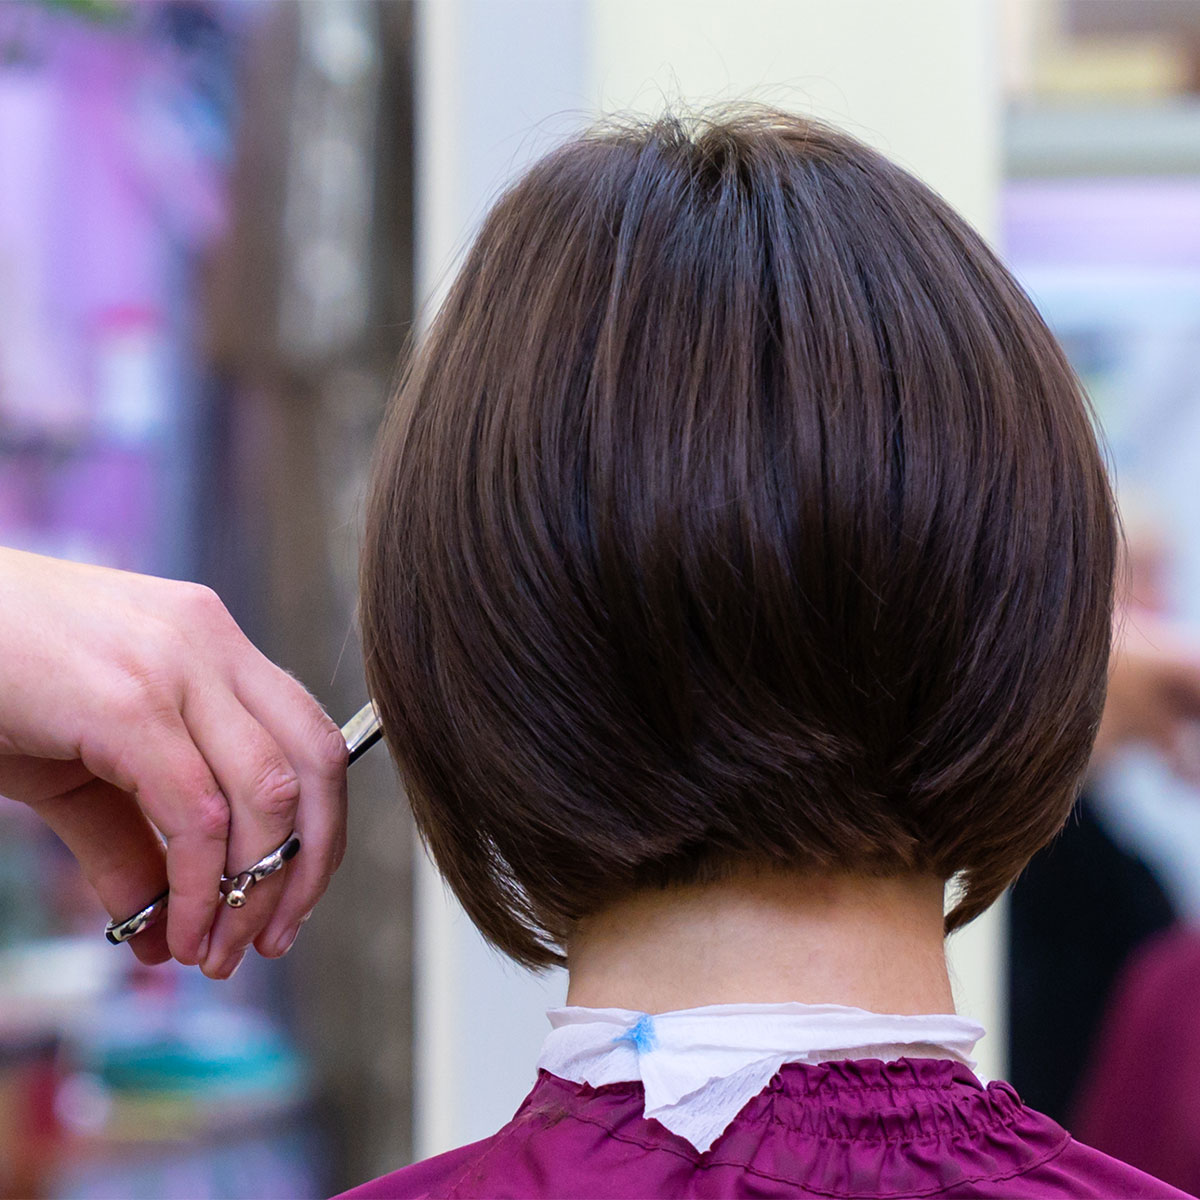 3 Unflattering Haircuts That Stylists Warn Age You Instantly - SHEfinds